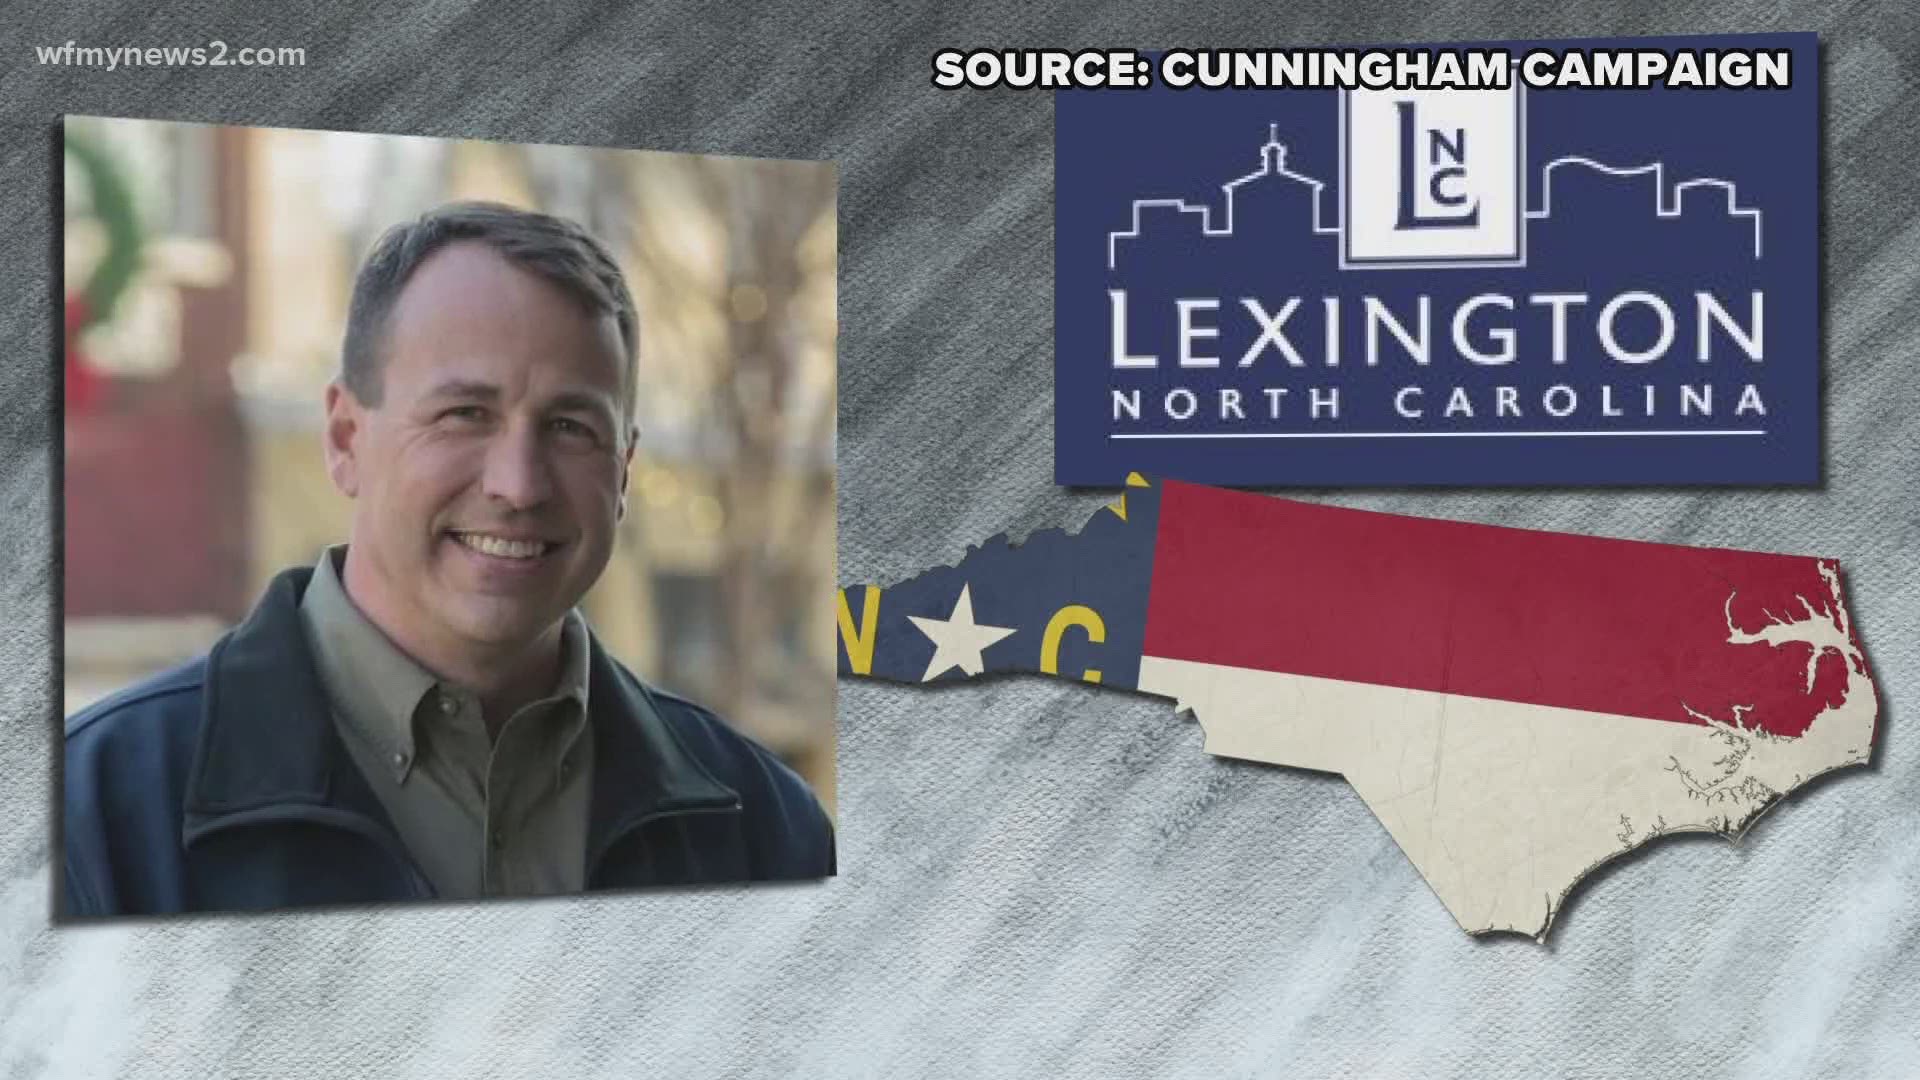 Lt. Col. Cal Cunningham goes on the record about his campaign platform and attack ad claims, as he seeks to unseat the Republican incumbent.